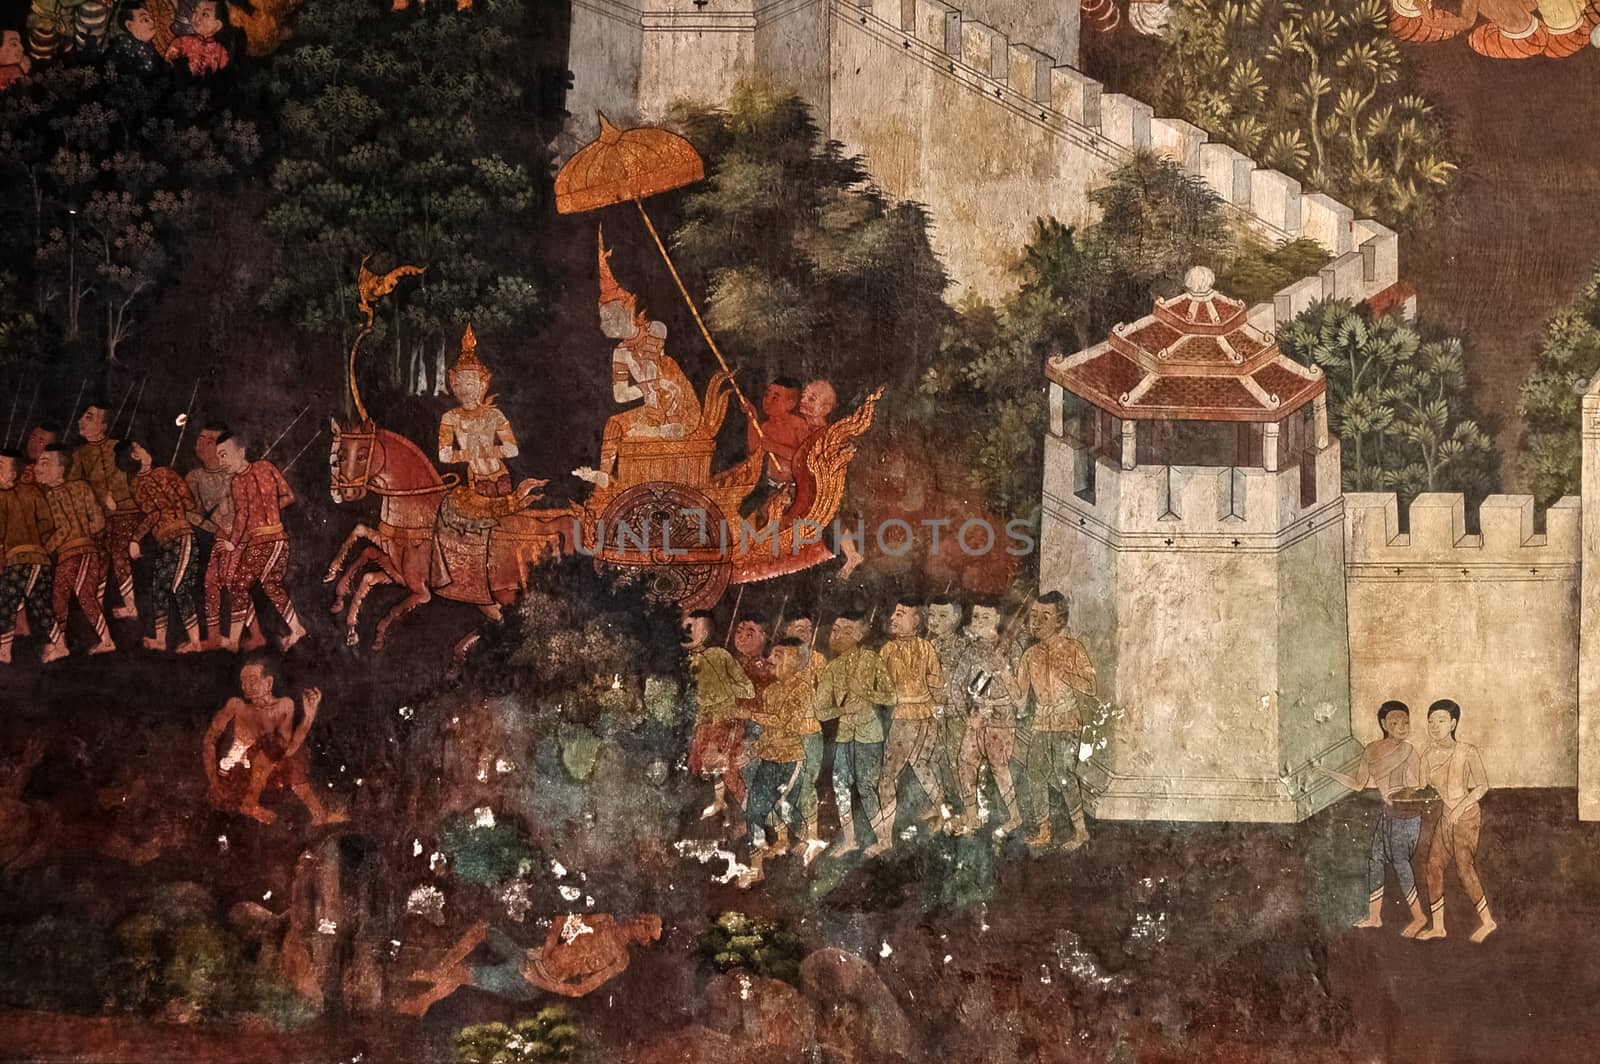 Ancient Thai Ramayana drawing on a wall (paiting is public domain) by eyeofpaul